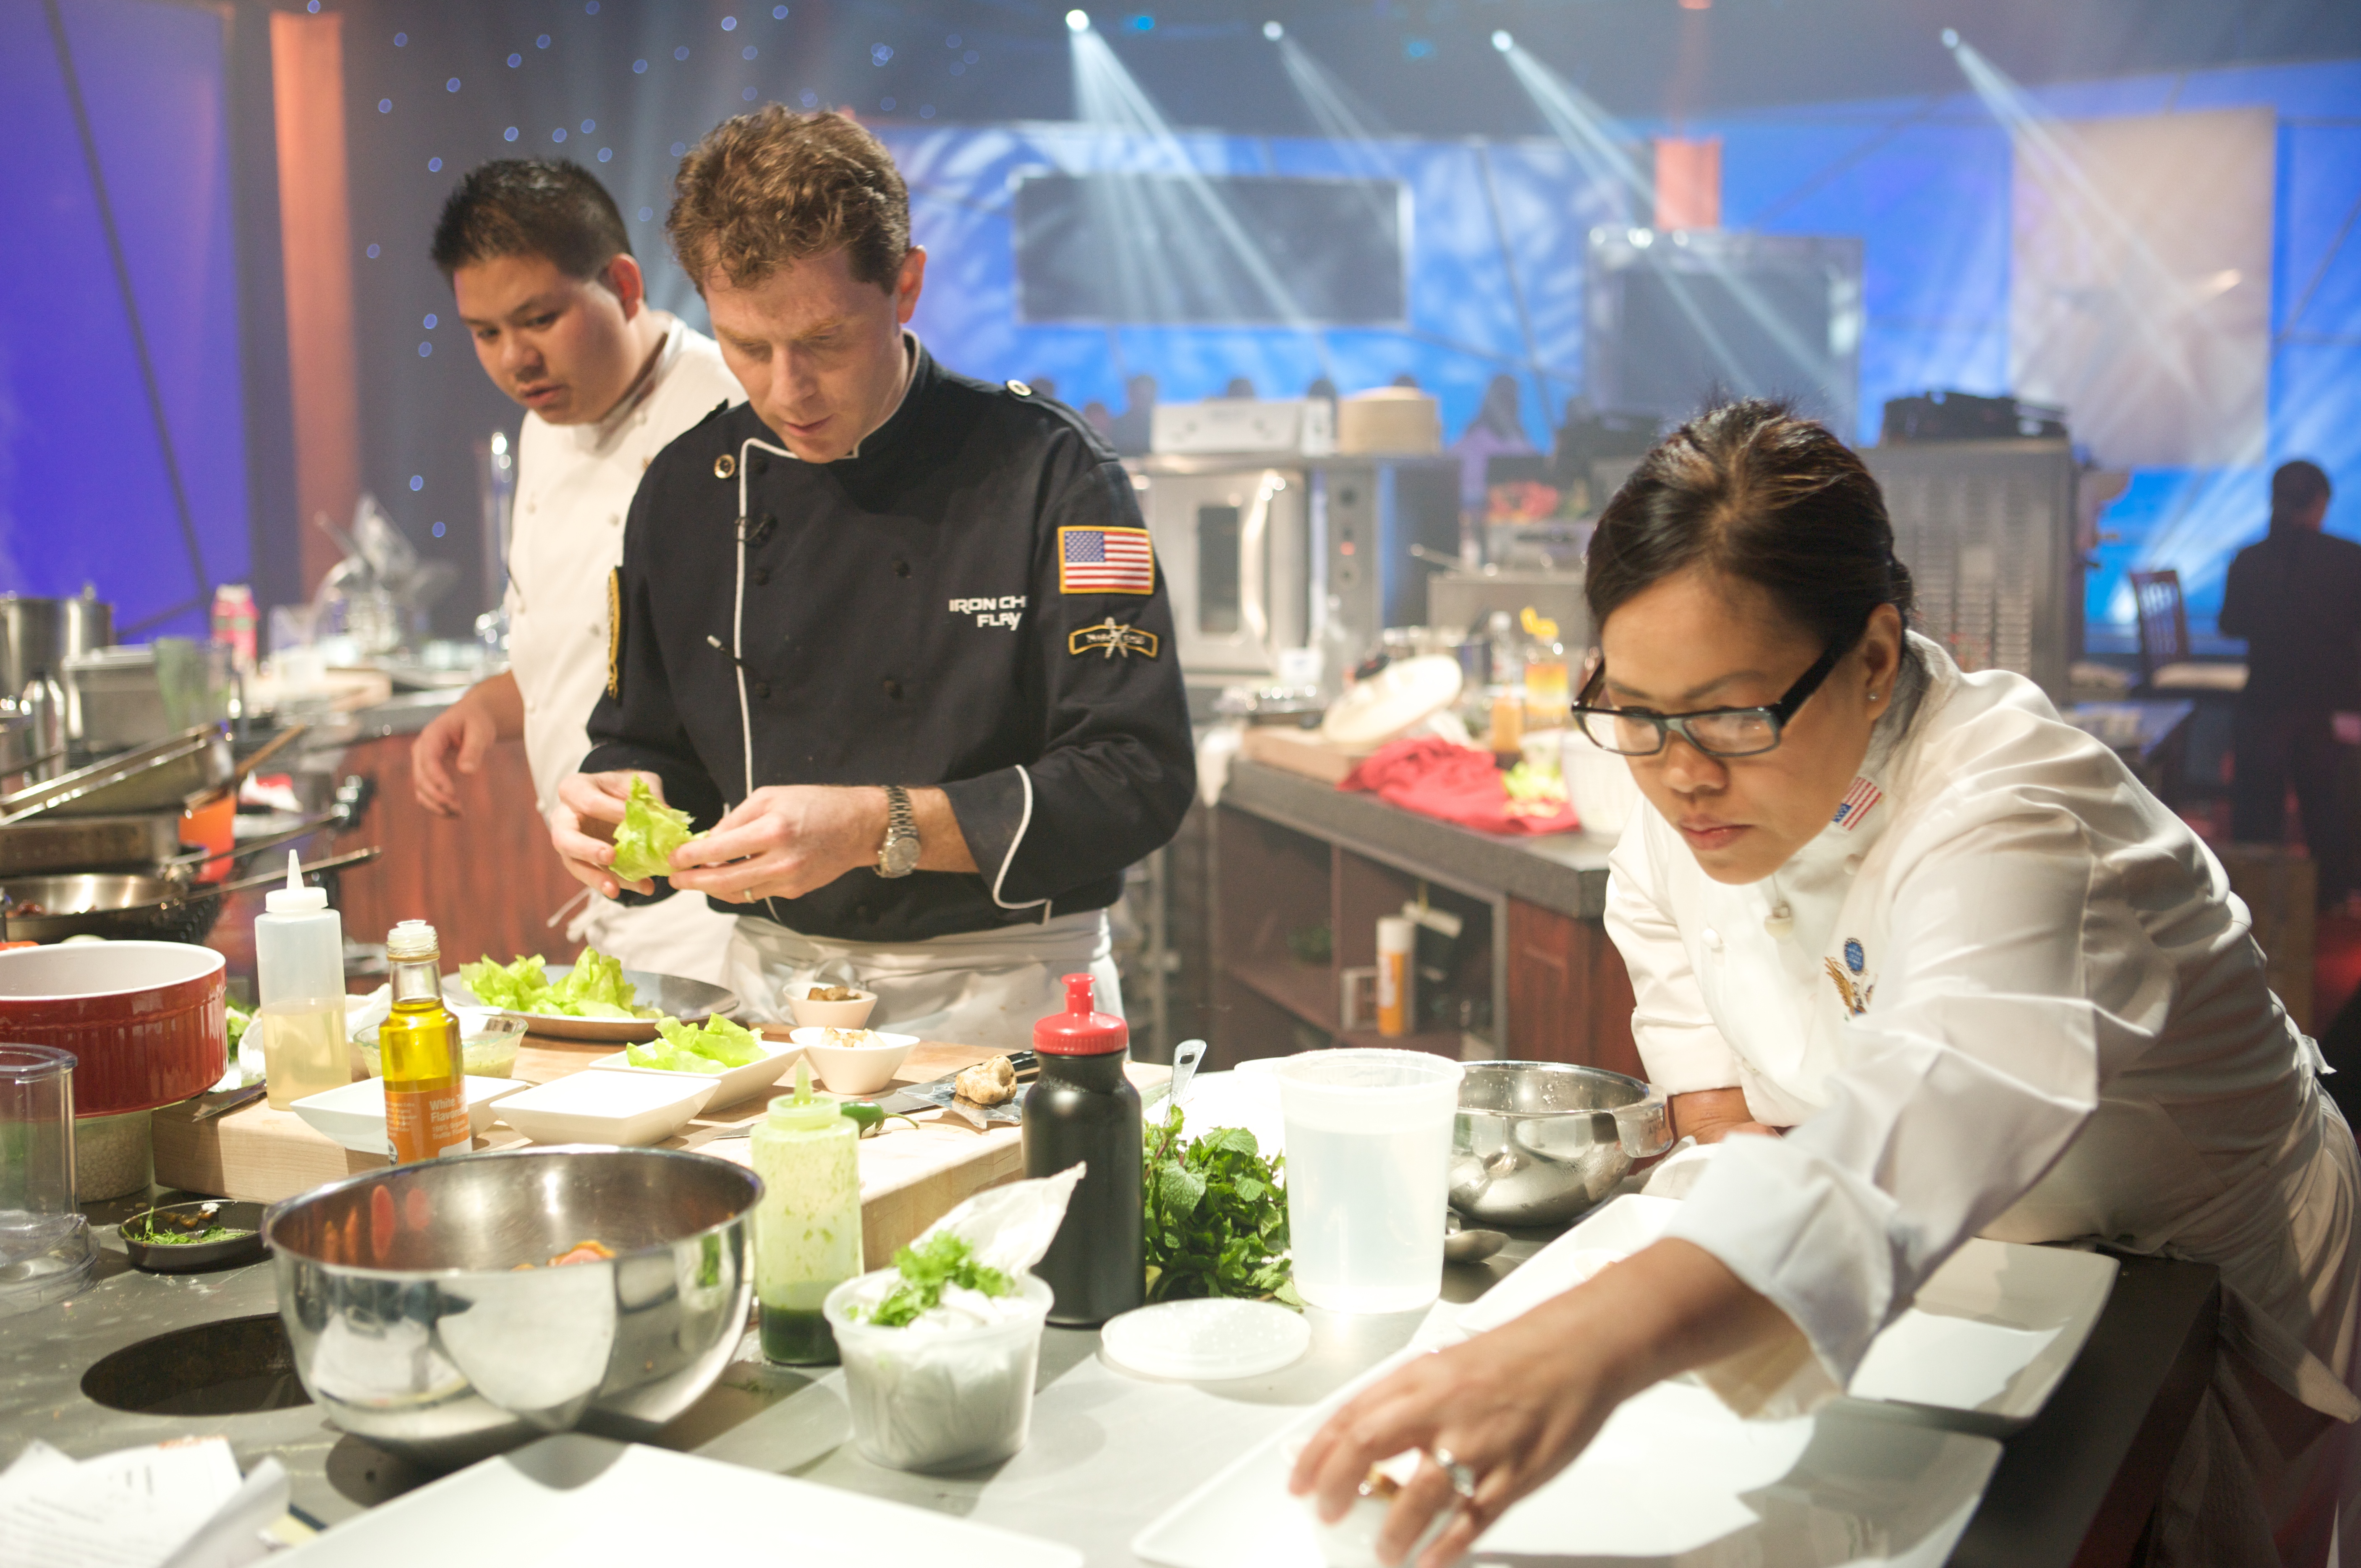 White House Executive Chef Comerford and Bobby Flay on Iron Chef